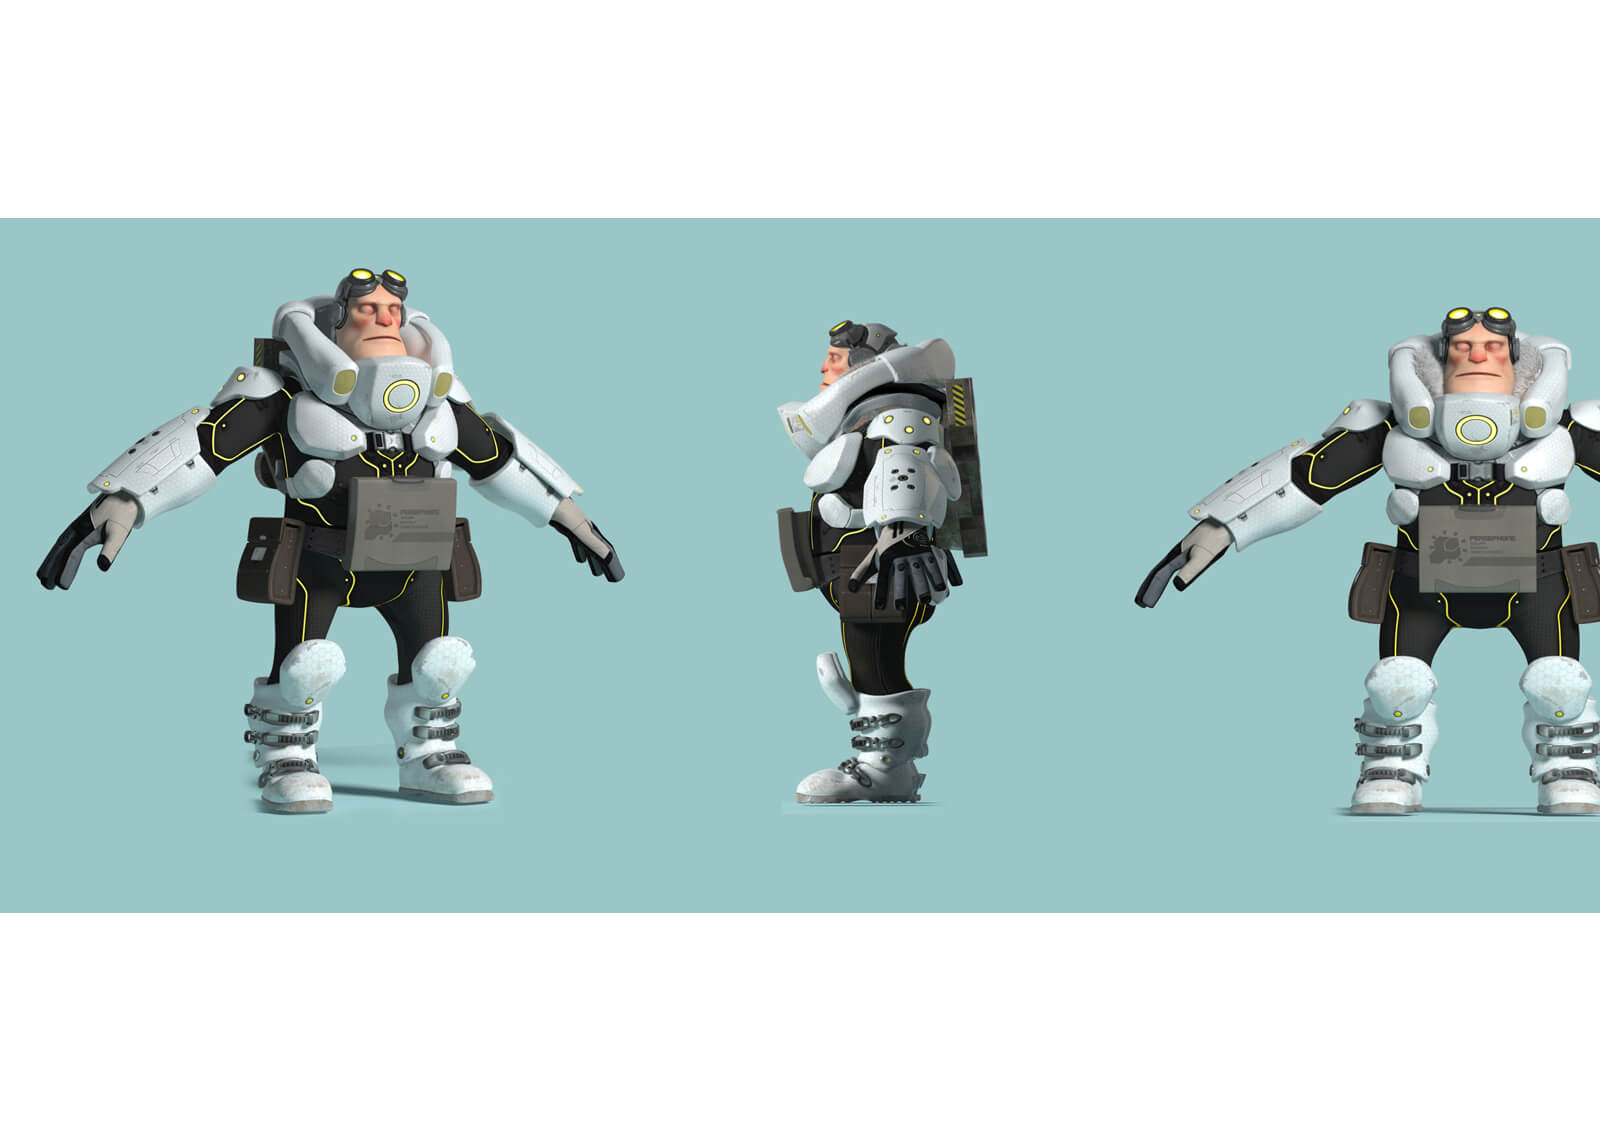 3D models from the film Level 1457 of a man in goggles and black and white futuristic armor from the front and behind